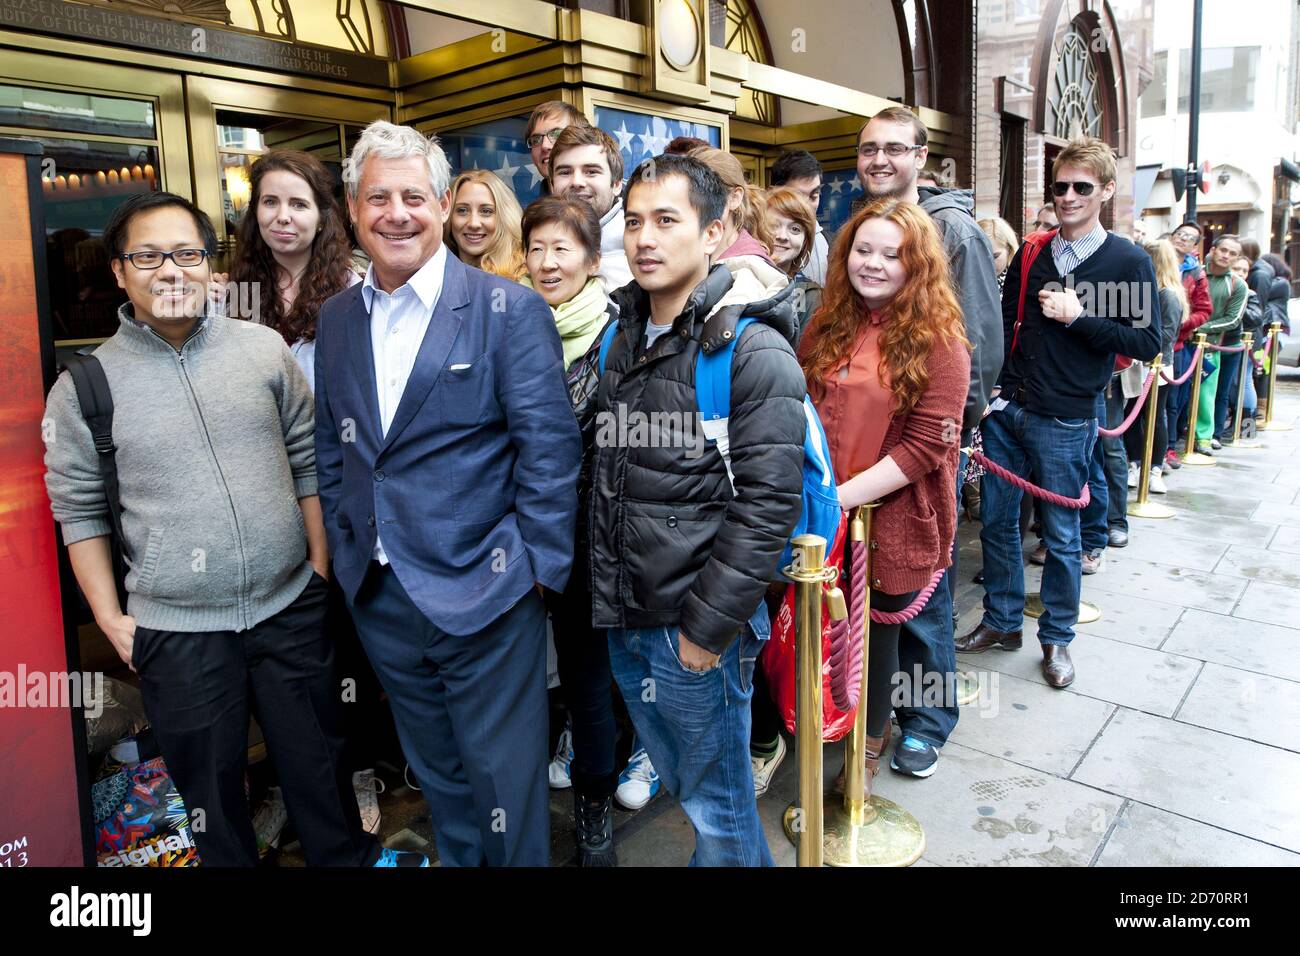 Producer Cameron Mackintosh welcomes theatre-goers queuing for Miss Saigon tickets, at the Prince Edward theatre in central London. Tickets for the show (opening May 2014) went on sale at 10am today, and sales set a new record for the largest single day of sales in West End and Broadway history. Stock Photo